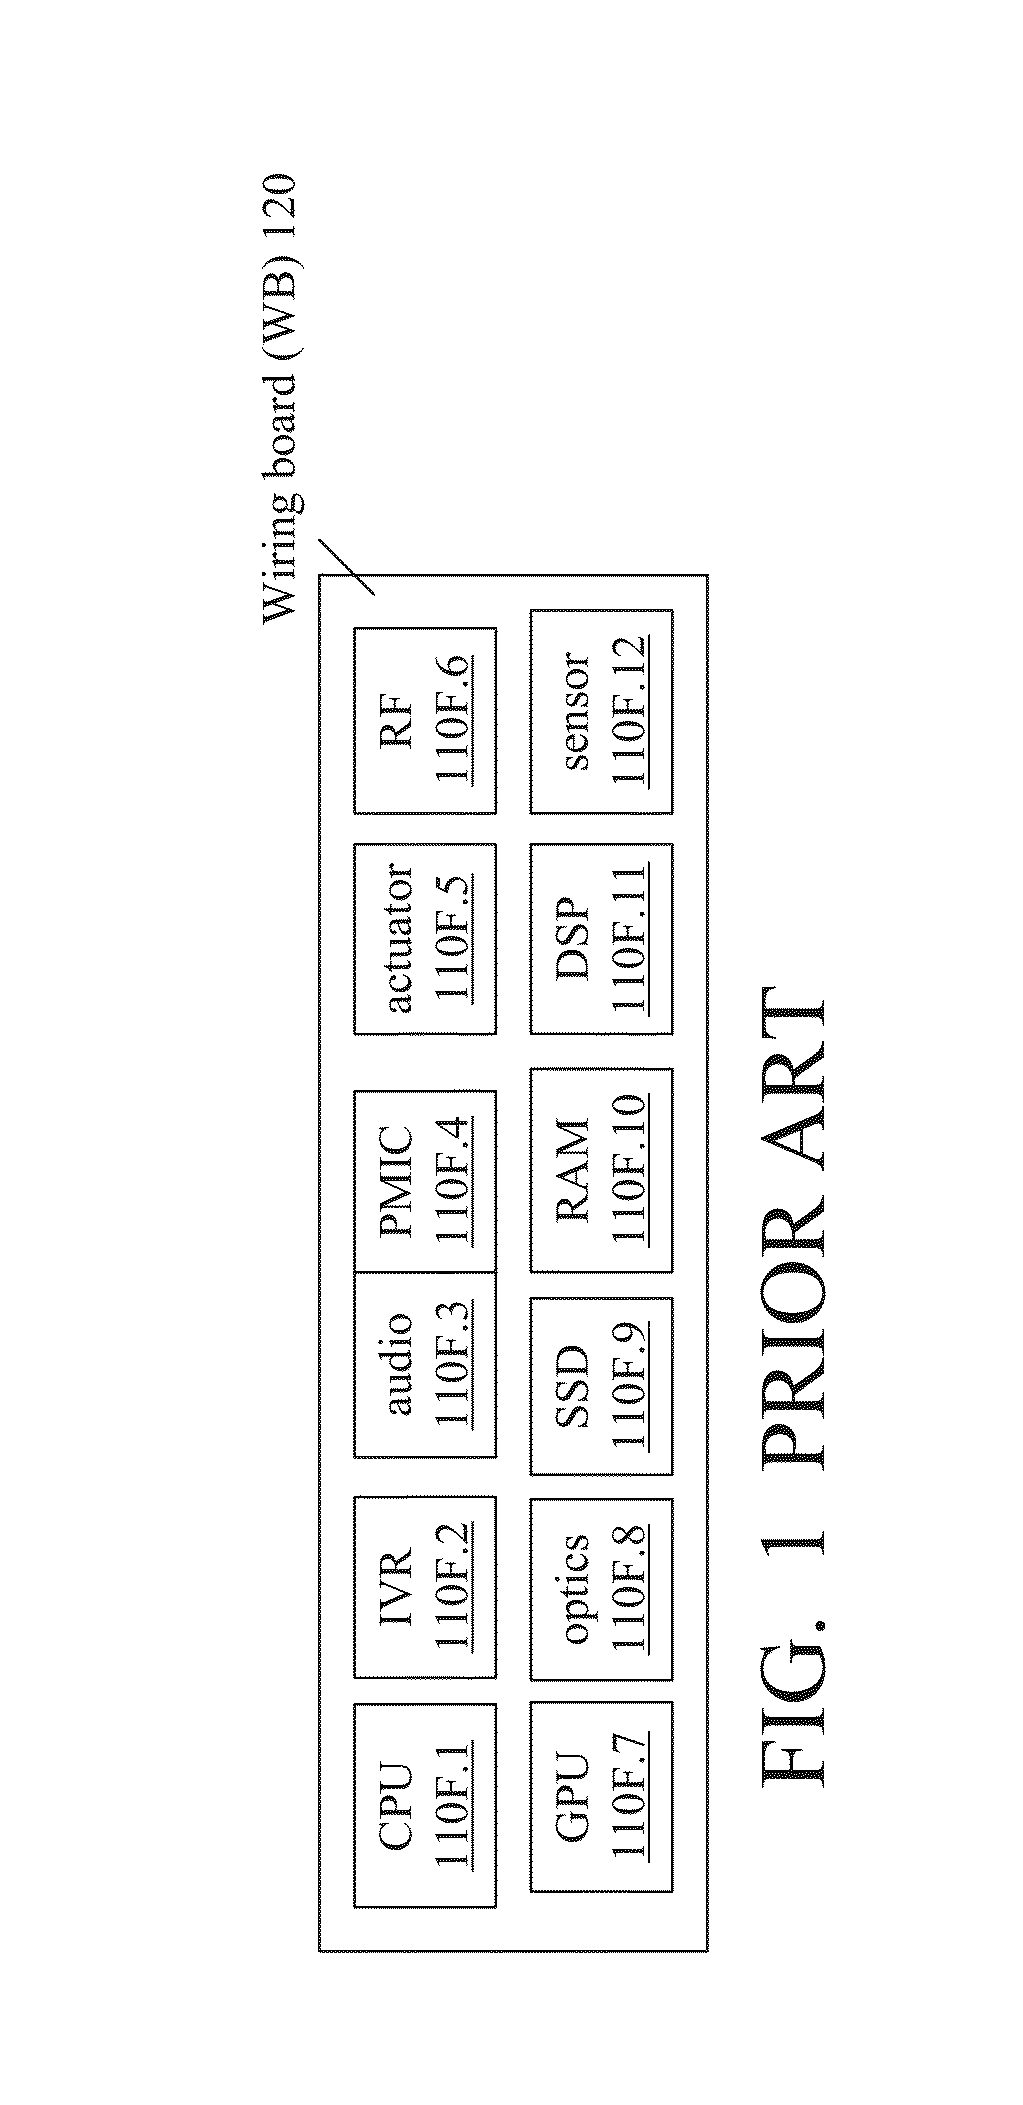 Multichip modules and methods of fabrication